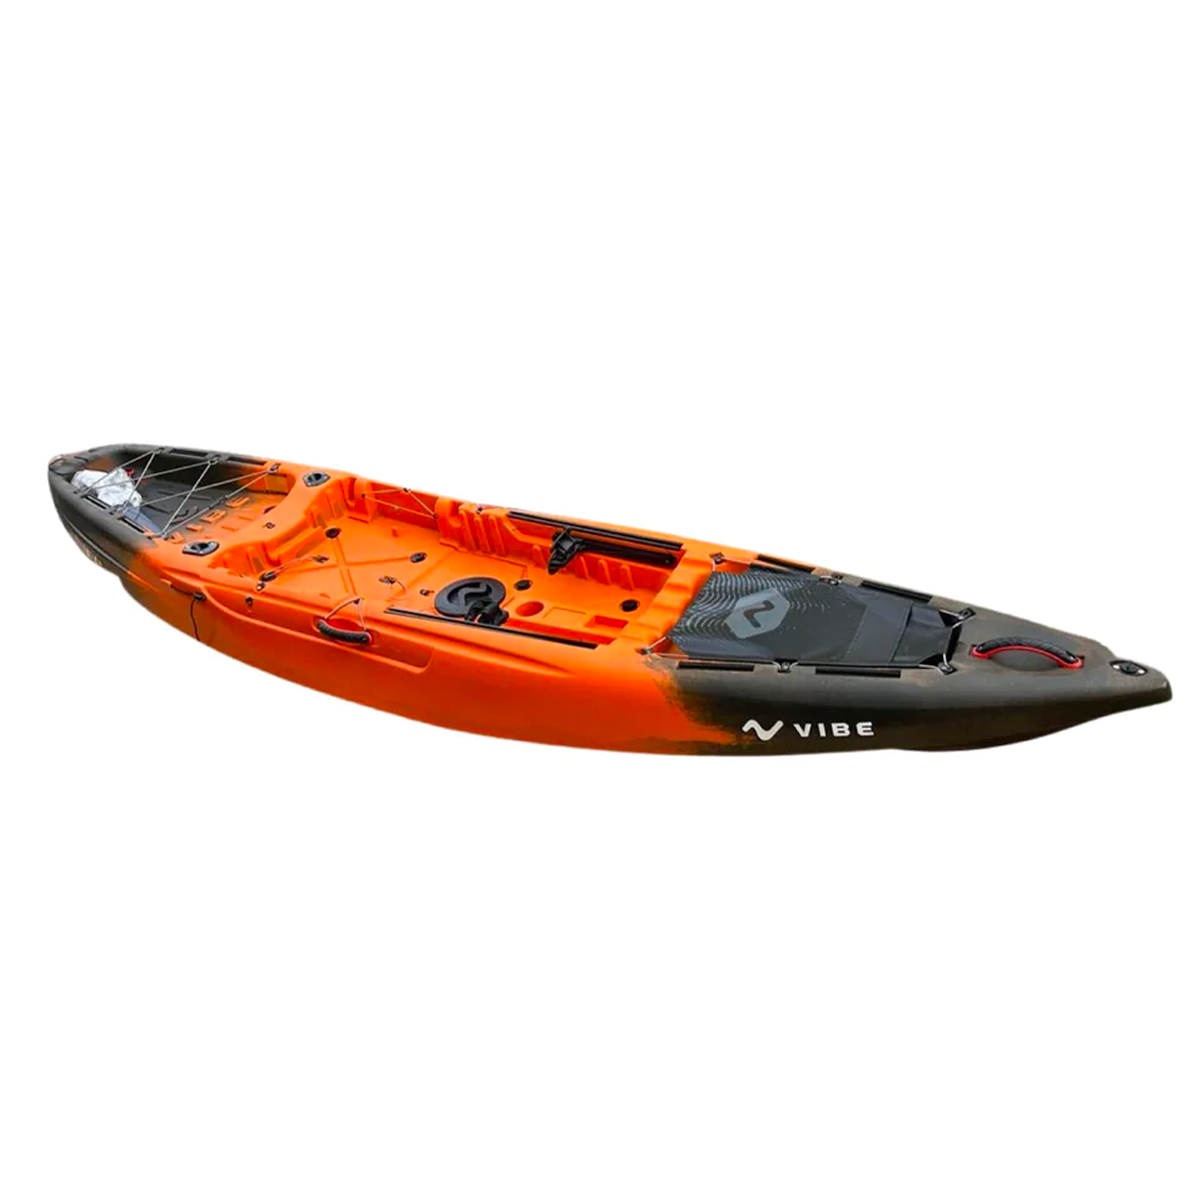 Yellowfin_120-Vibe-Wildfire-02-ExcelBoats